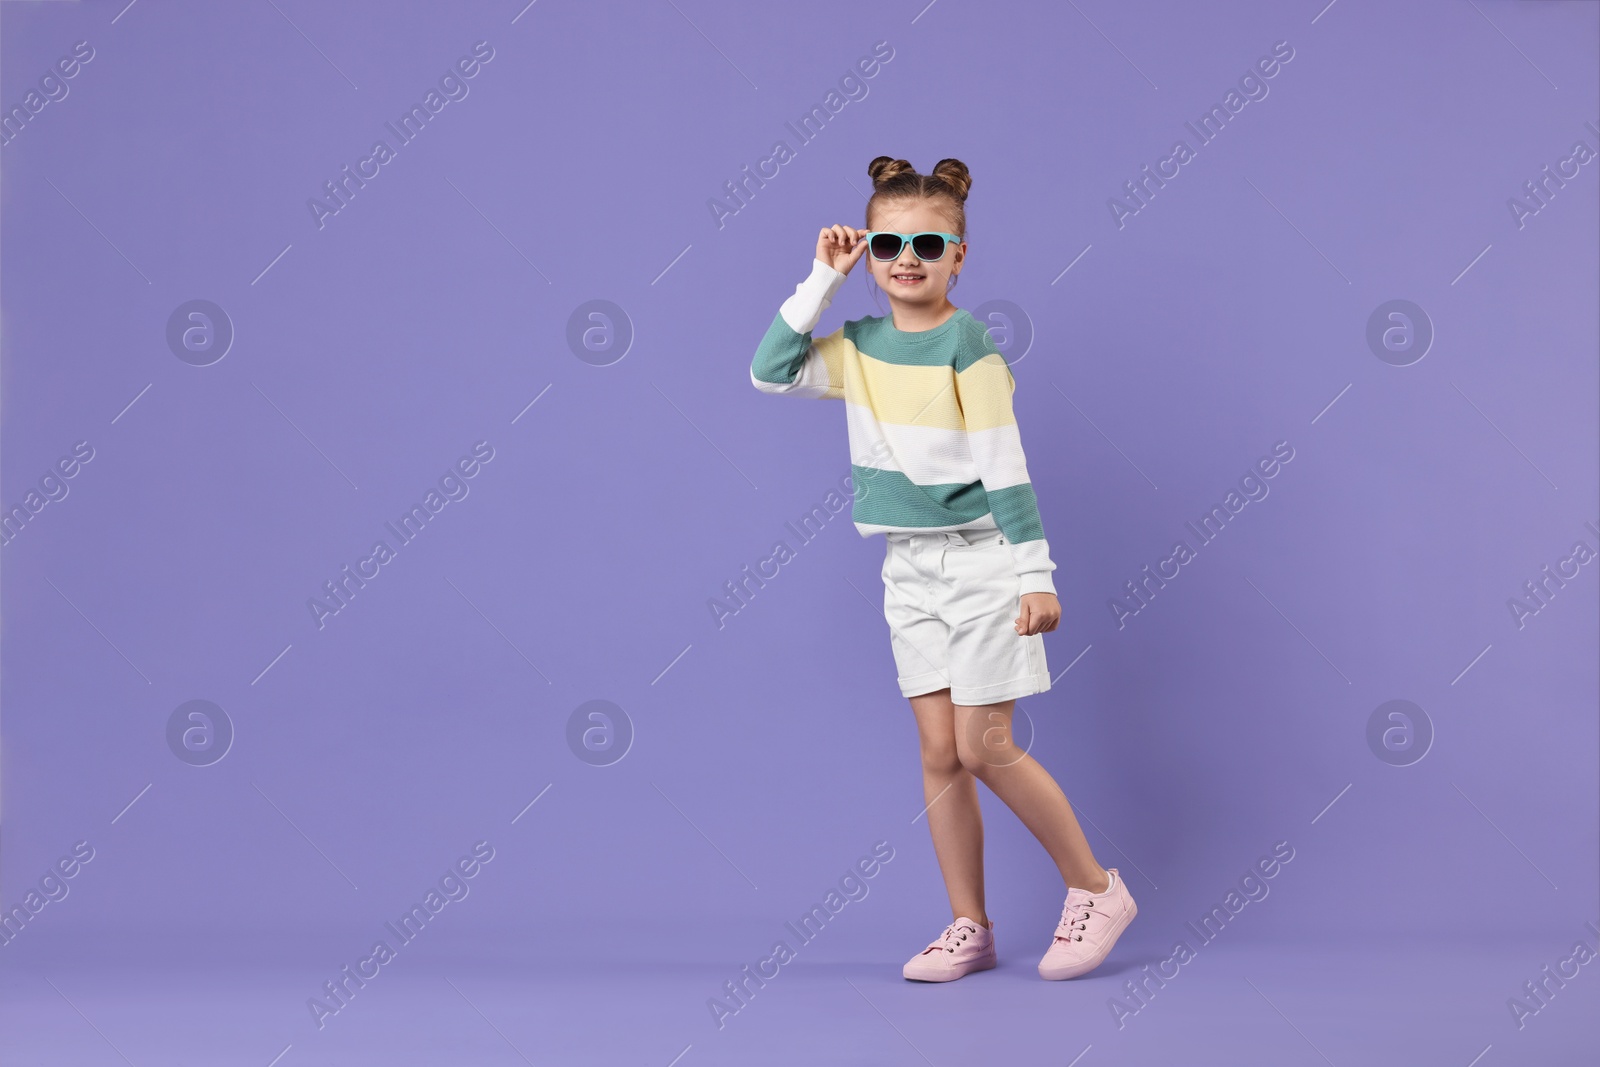 Photo of Cute little girl in sunglasses dancing on violet background, space for text